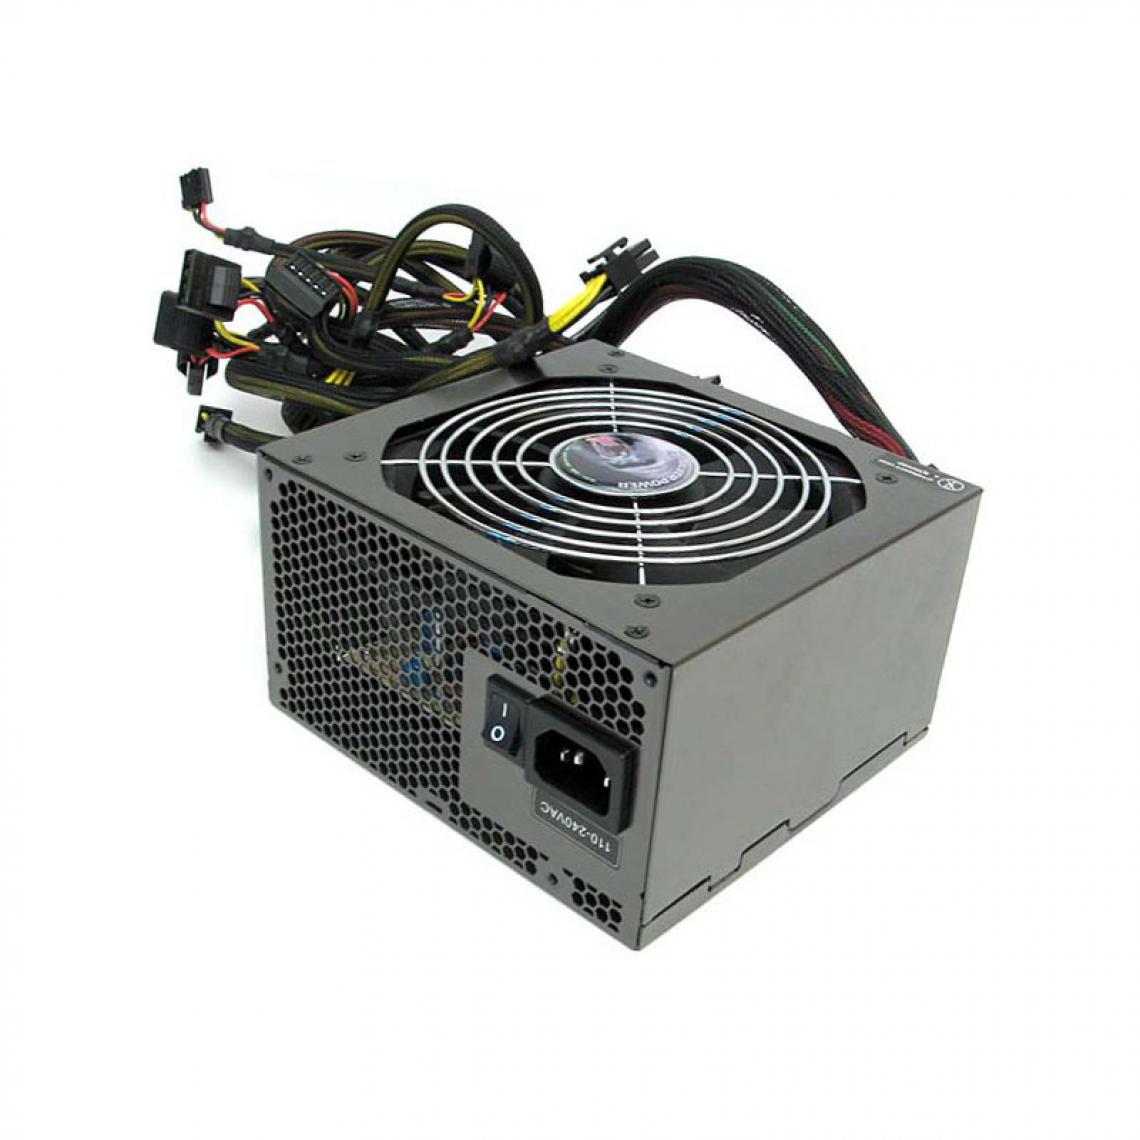 Silverpower - Alimentation PC SILVER POWER SP-SS400 400W 80 PLUS ATX 12V Power Supply - Alimentation modulaire